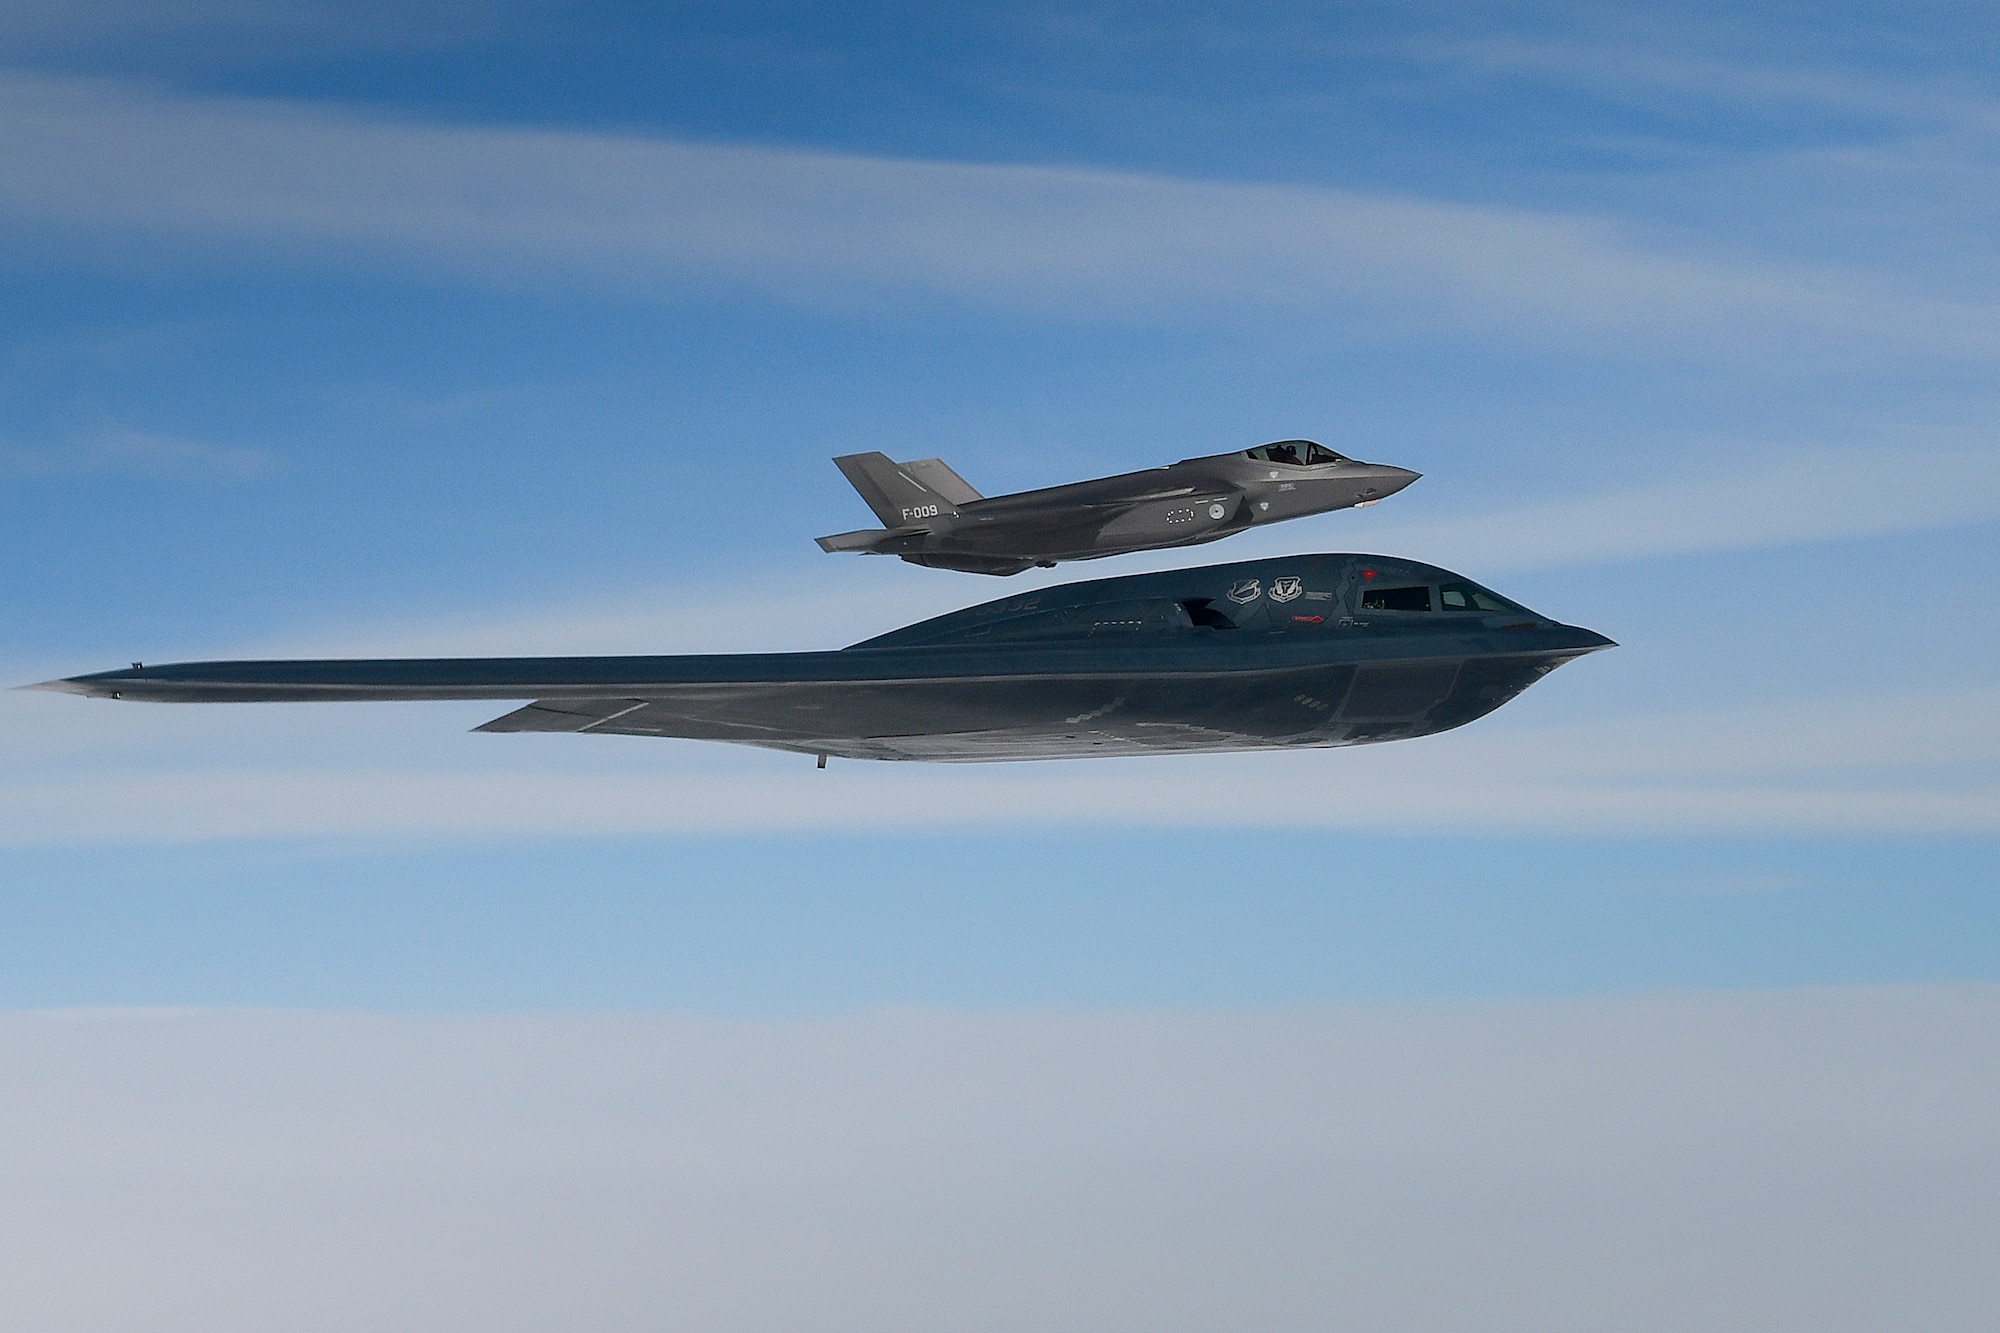 A U.S. Air Force B-2A Spirit assigned to the 509th Bomb Wing at Whiteman Air Force Base, Mo., and a Royal Netherlands Air Force F-35A Lightning II conduct aerial operations in support of Bomber Task Force Europe 20-2 over the North Sea, March 18, 2020. Bomber missions provide opportunities to train and work with NATO allies and theater partners in combined and joint operations and exercises. (U.S. Air Force photo by Master Sgt. Matthew Plew)